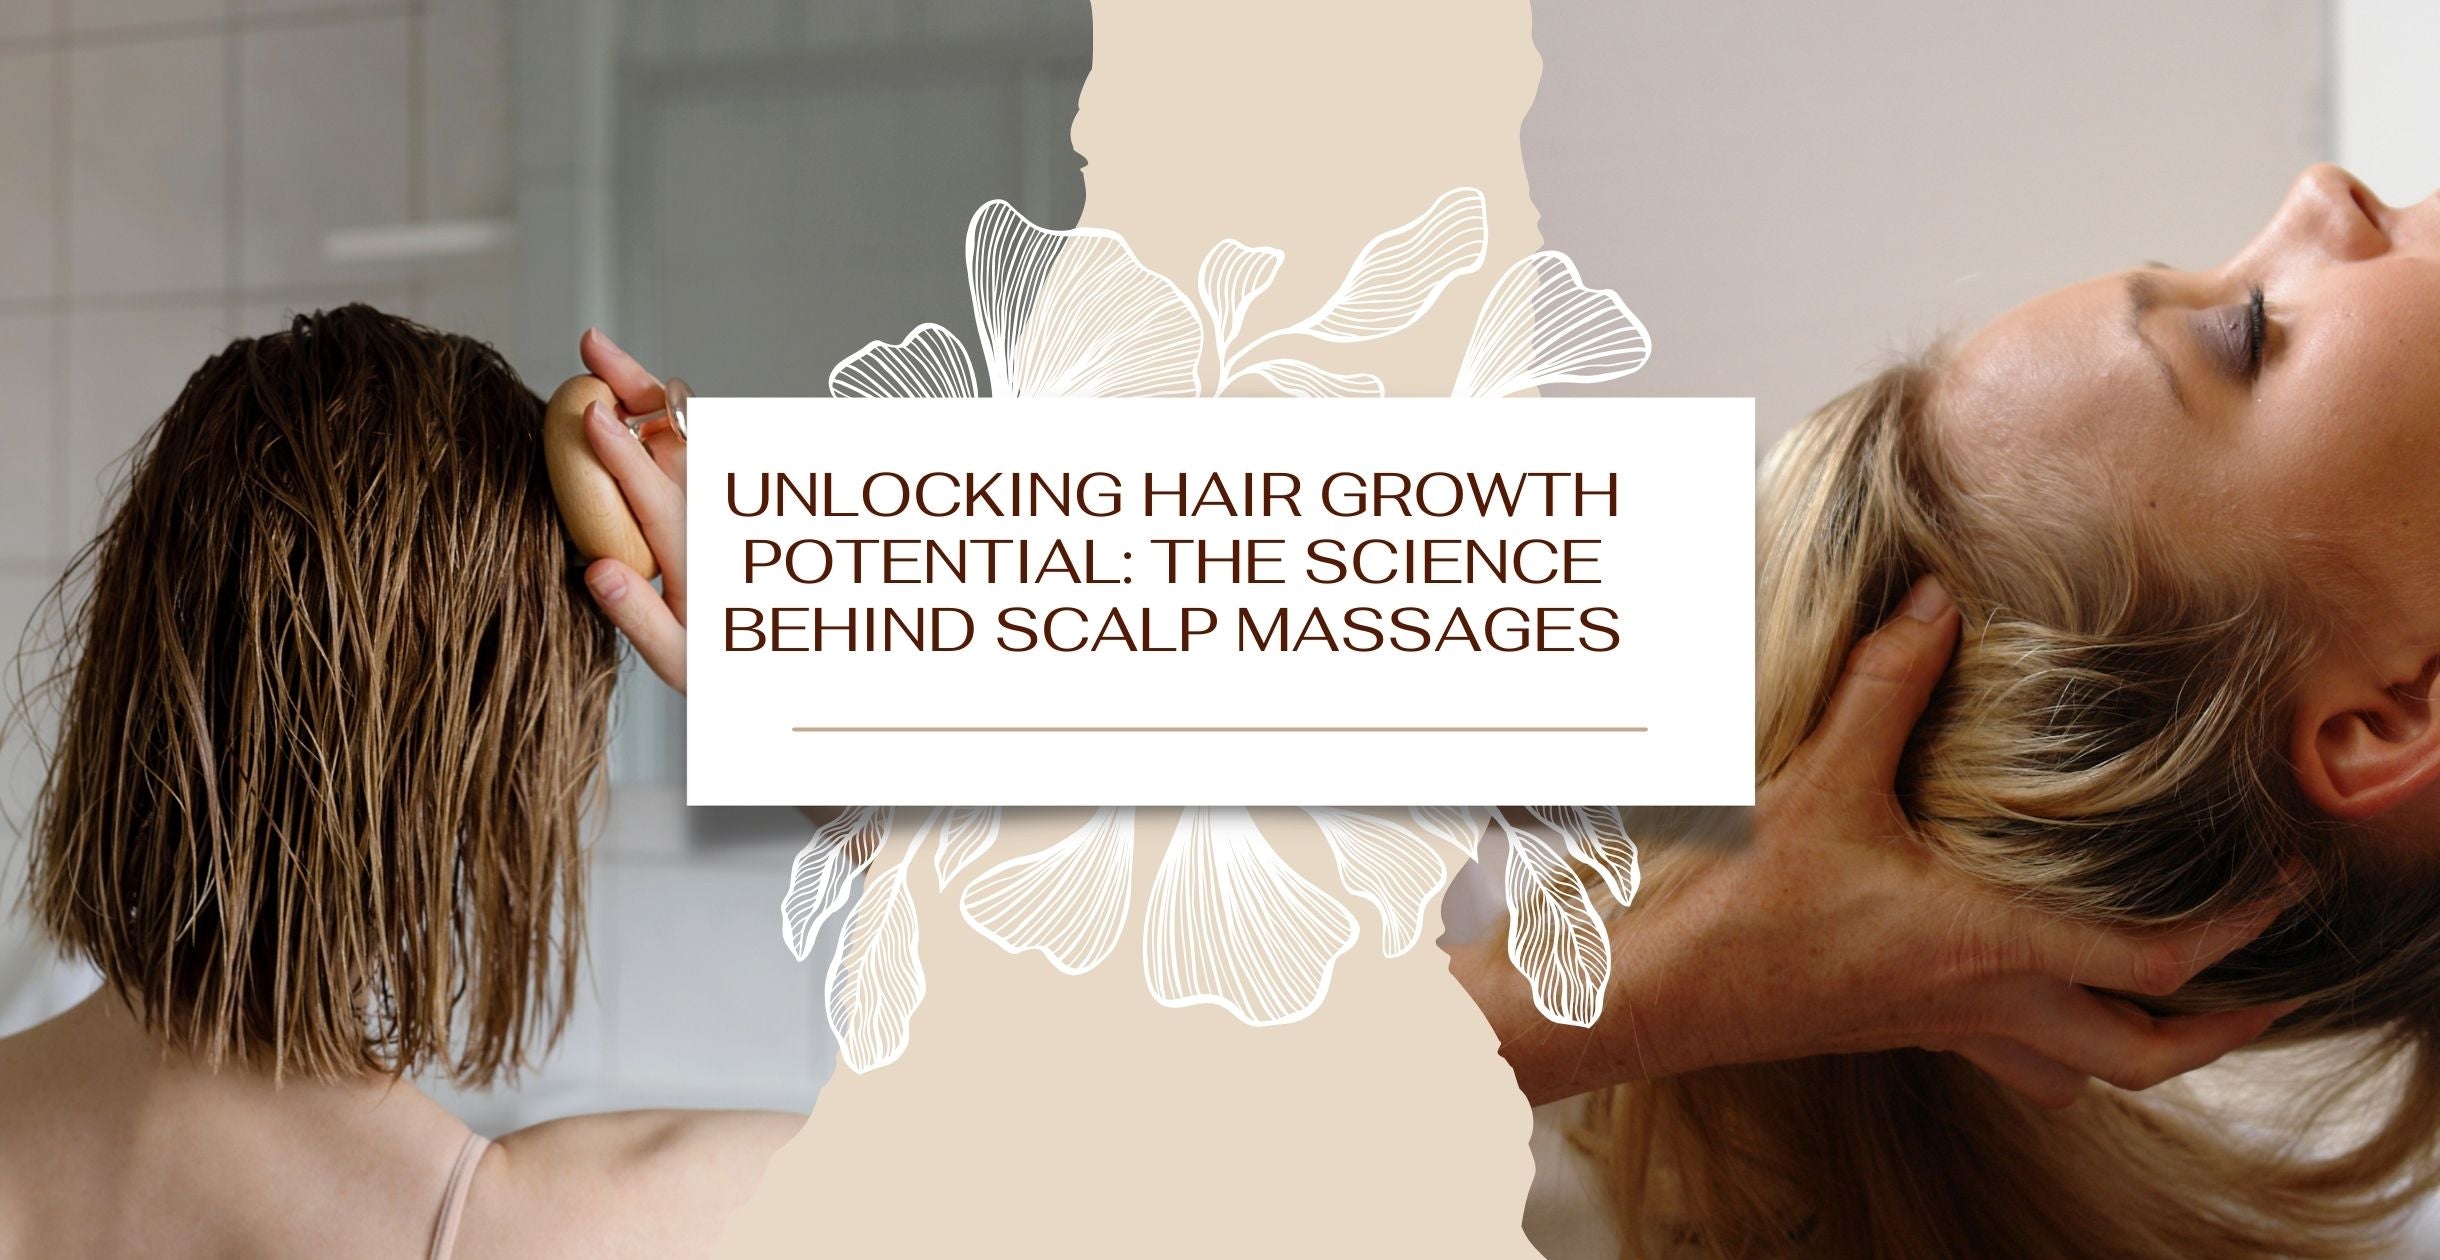 Unlocking Hair Growth Potential: The Science Behind Scalp Massages